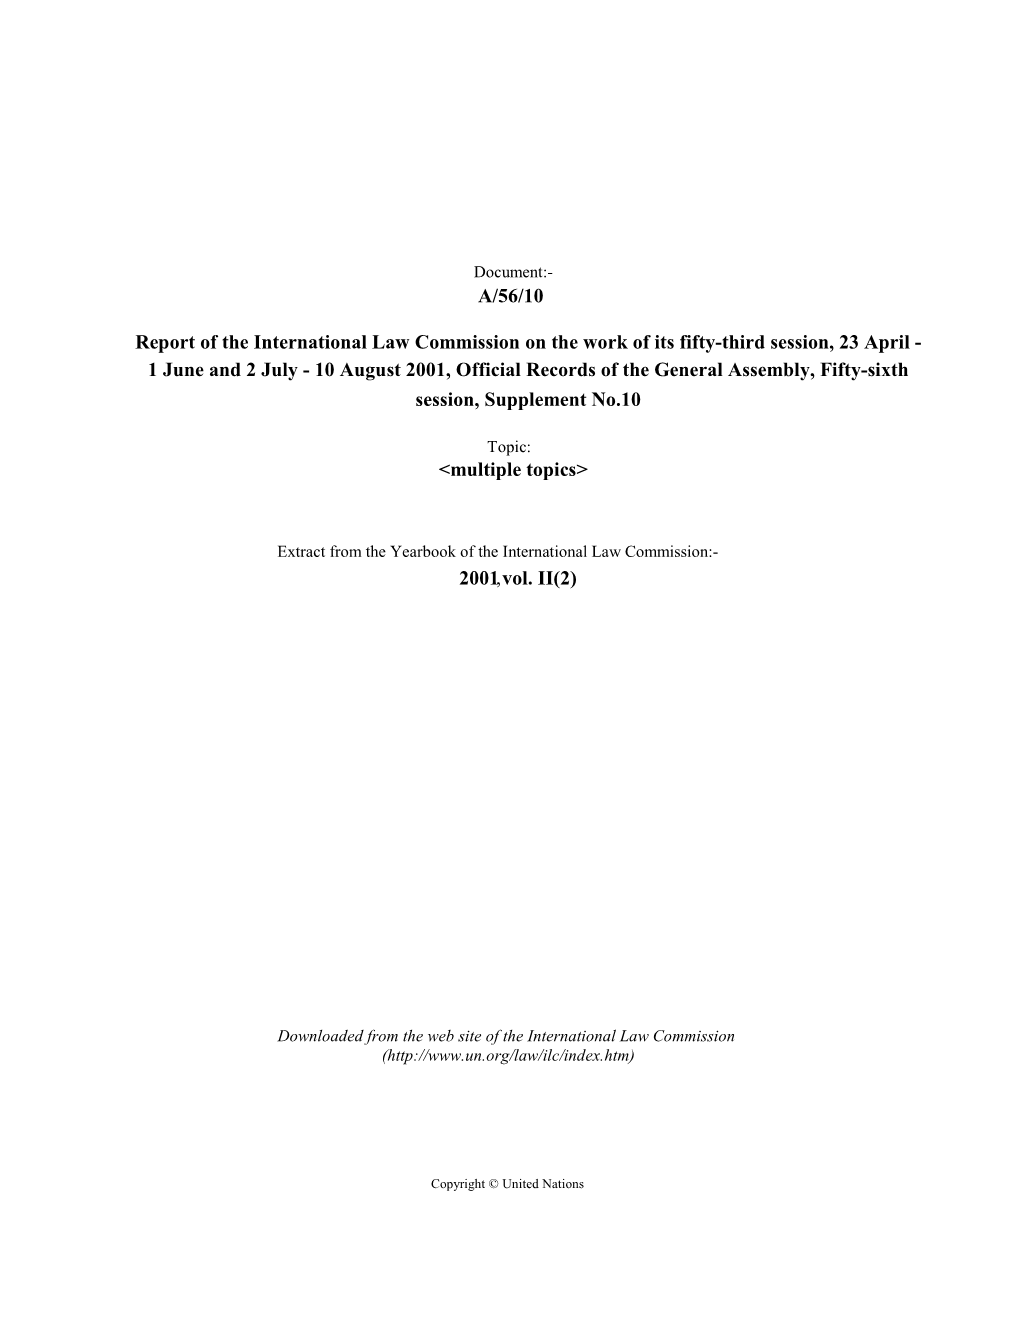 Report of the International Law Commission on the Work of Its Fifty